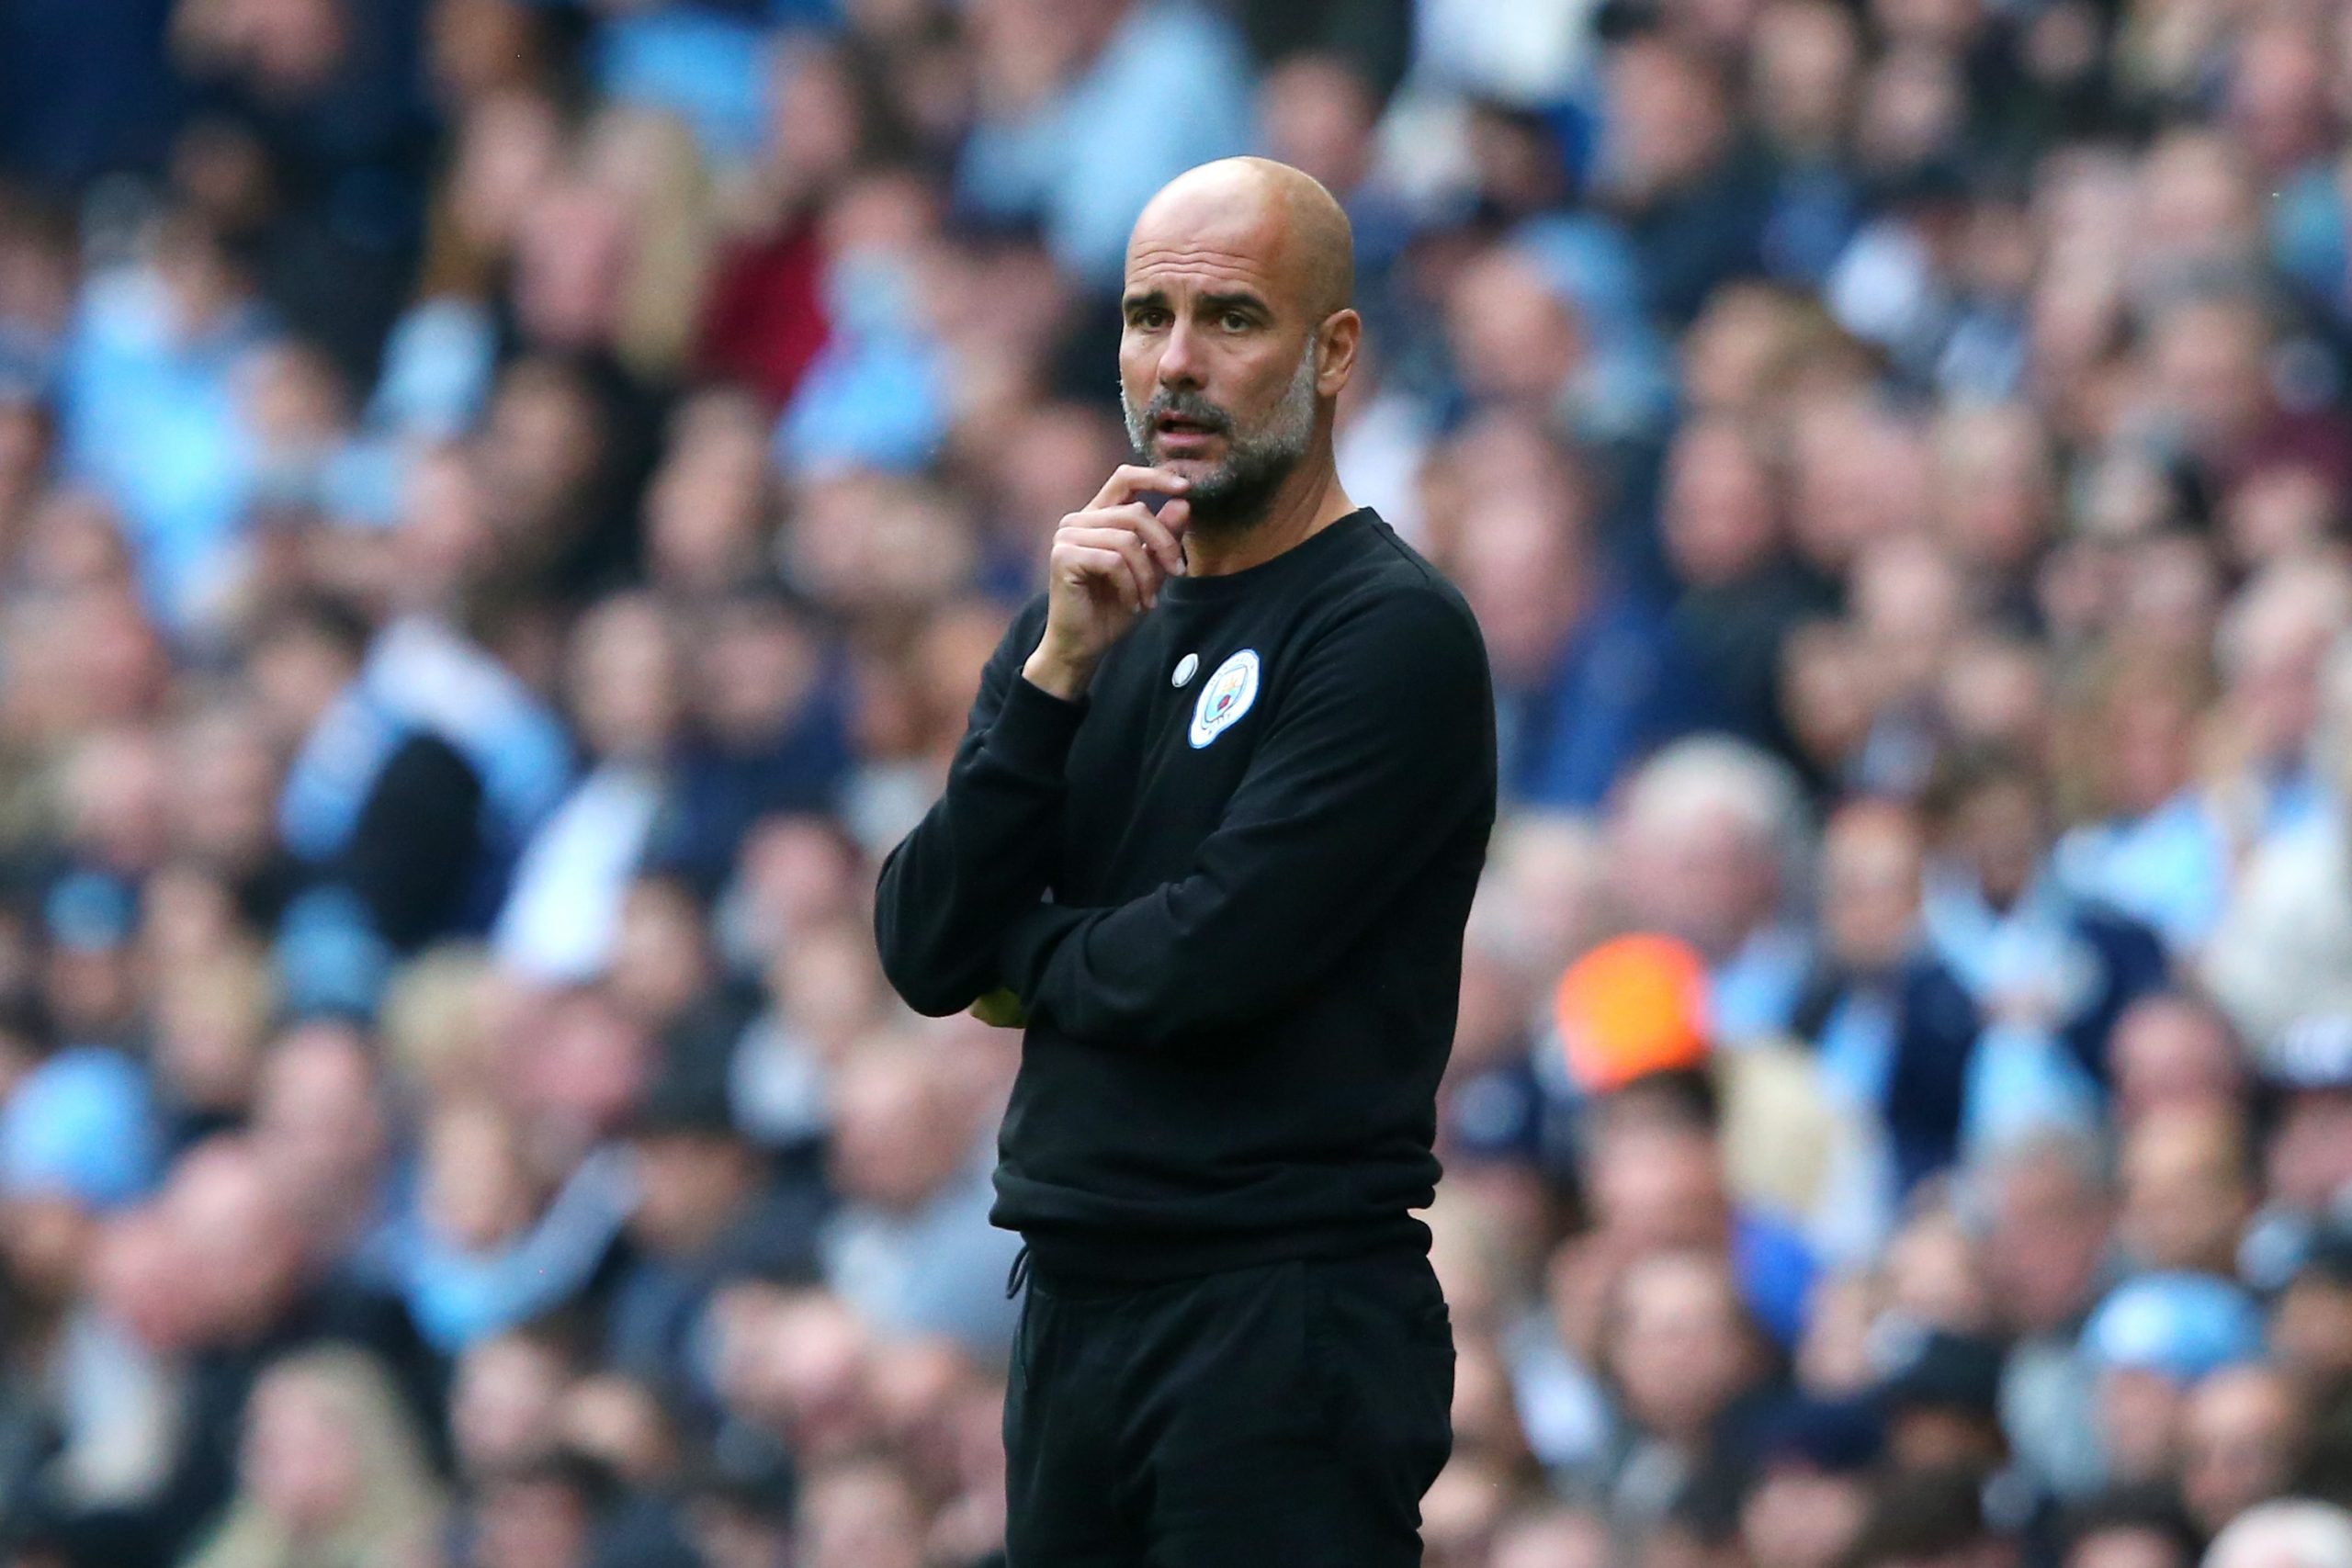 Pep Guardiola satisfied after win over Man United